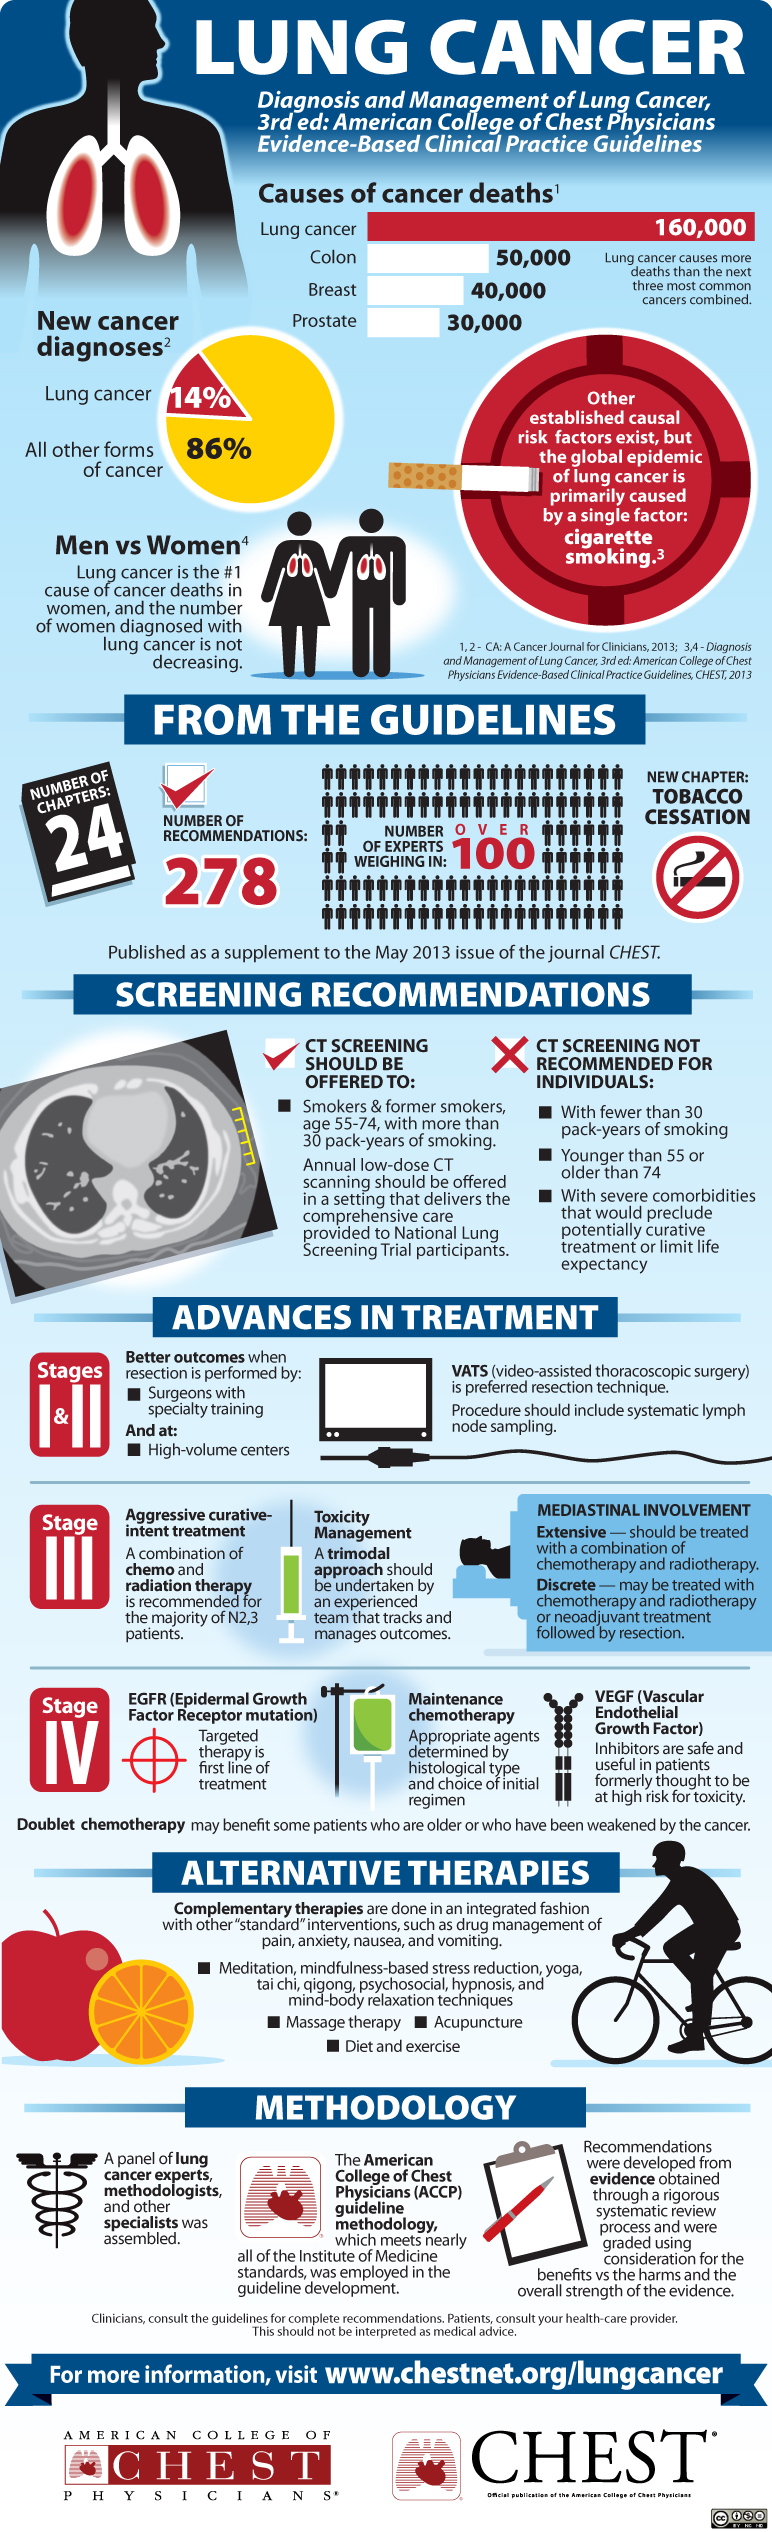 Lung Cancer Statistics and Facts